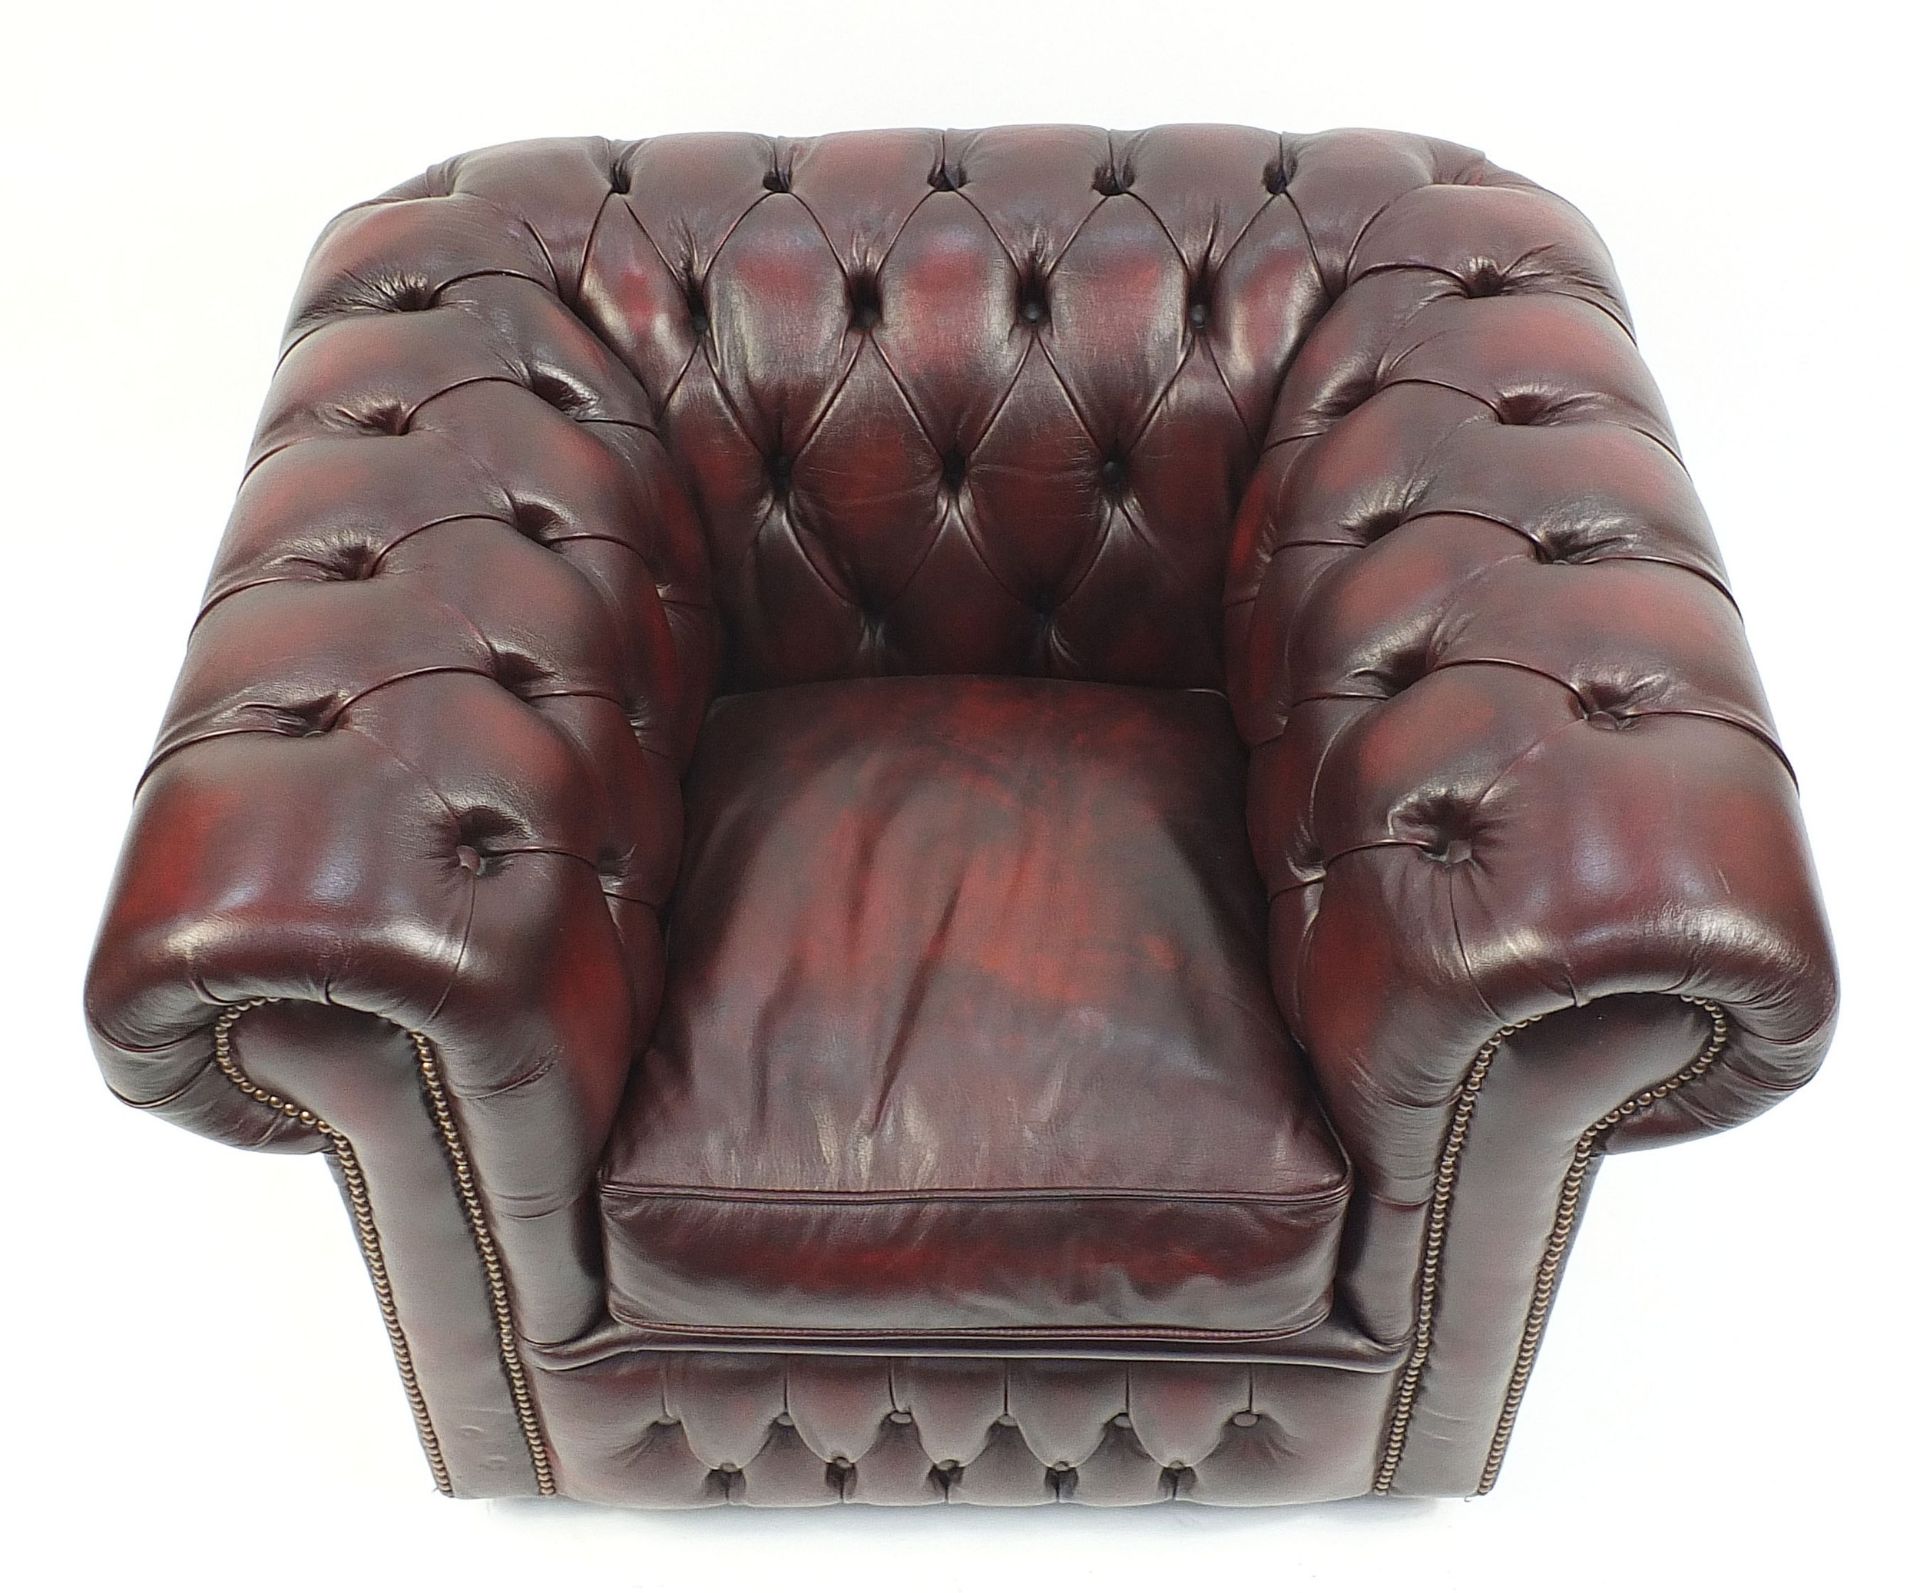 Ox blood leather Chesterfield club chair, 75cm H x 100cm W x 85cm D - Image 3 of 4